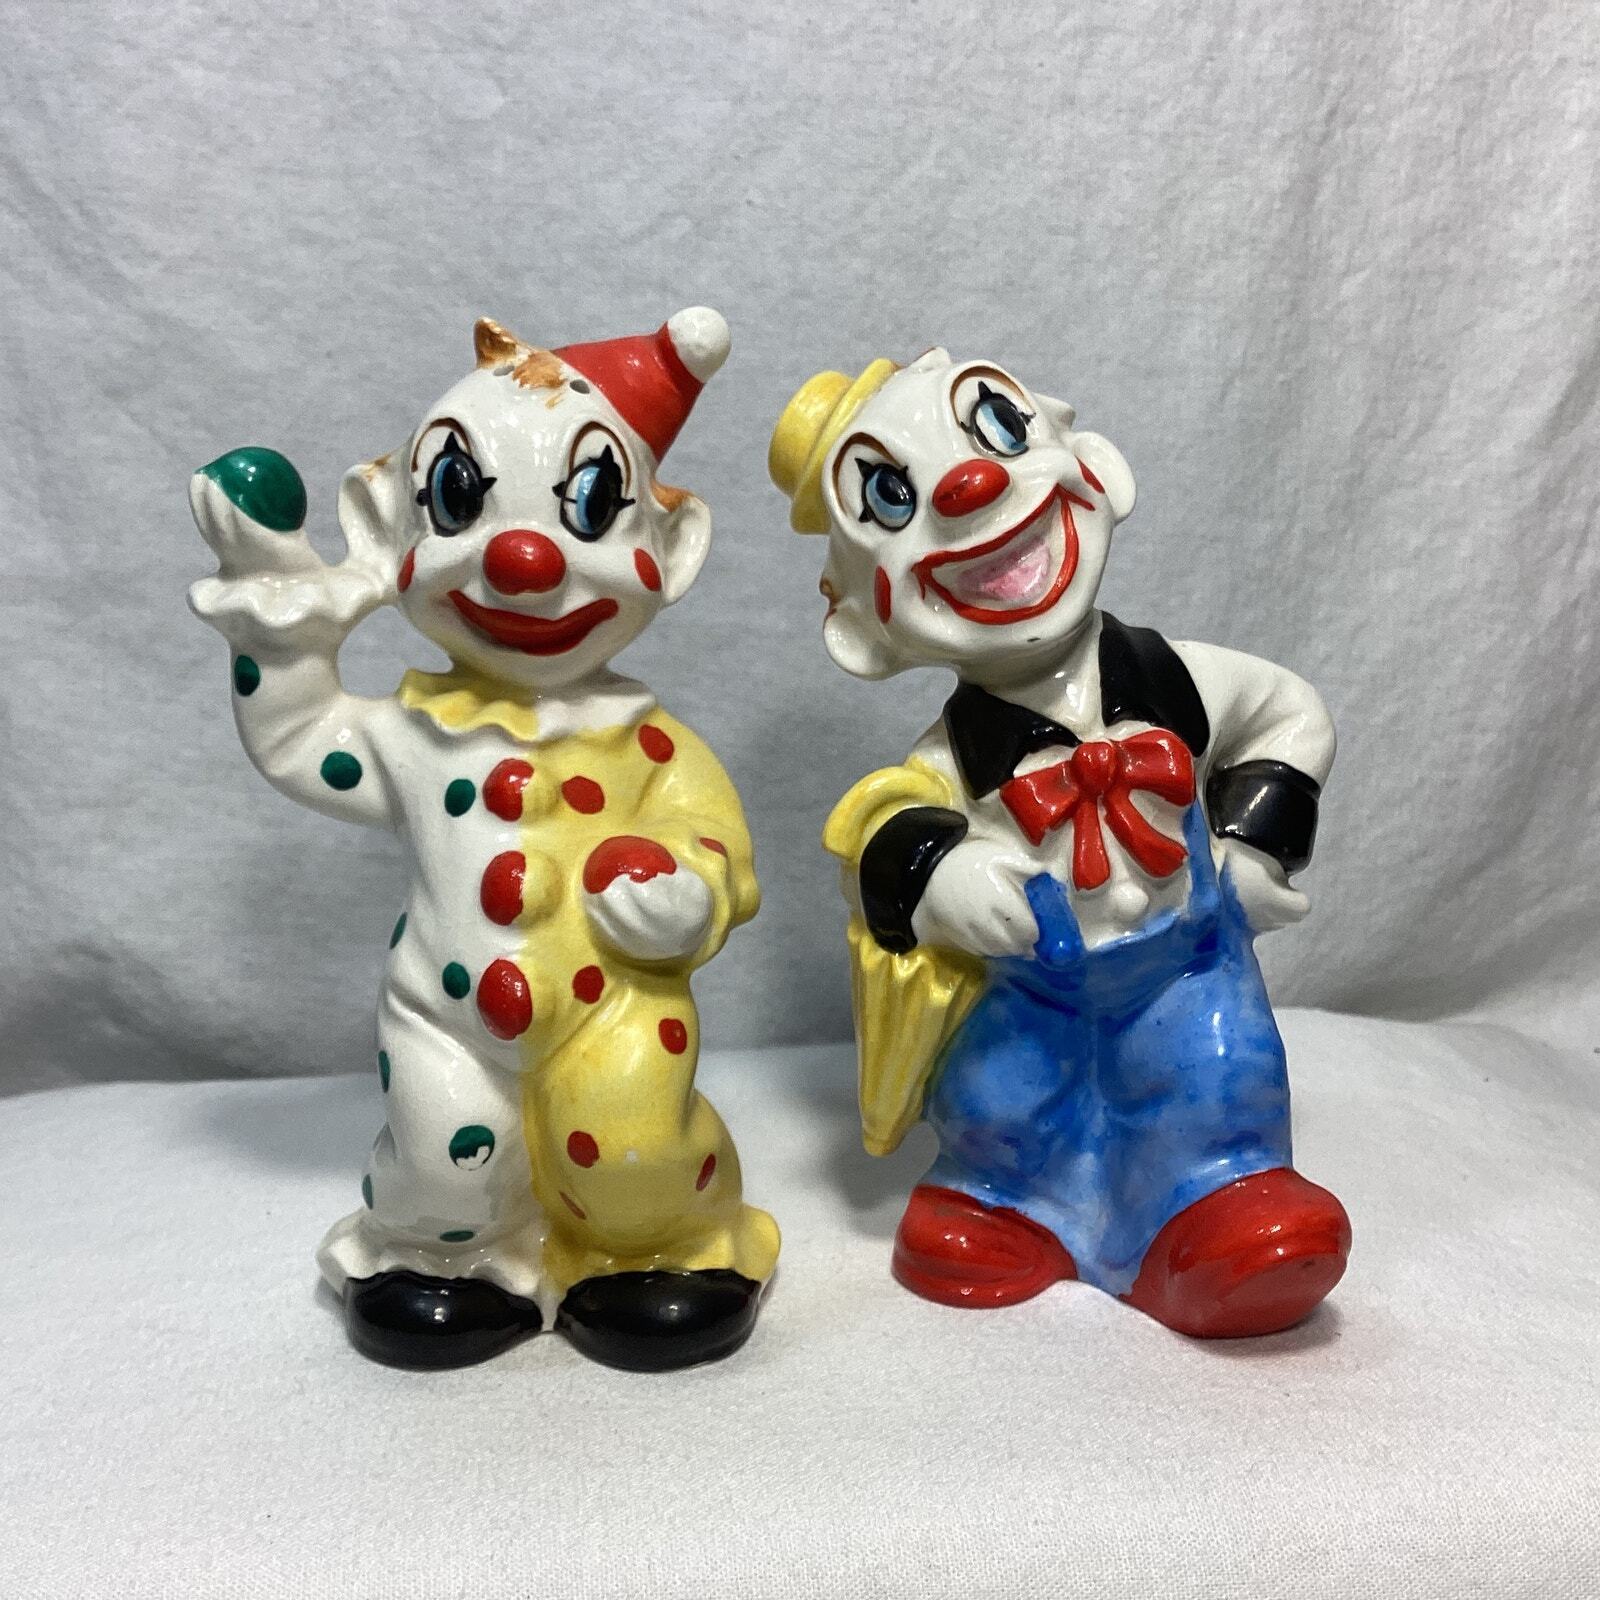 Vintage Happy Clown Salt and Pepper Shakers Ball and Umbrella